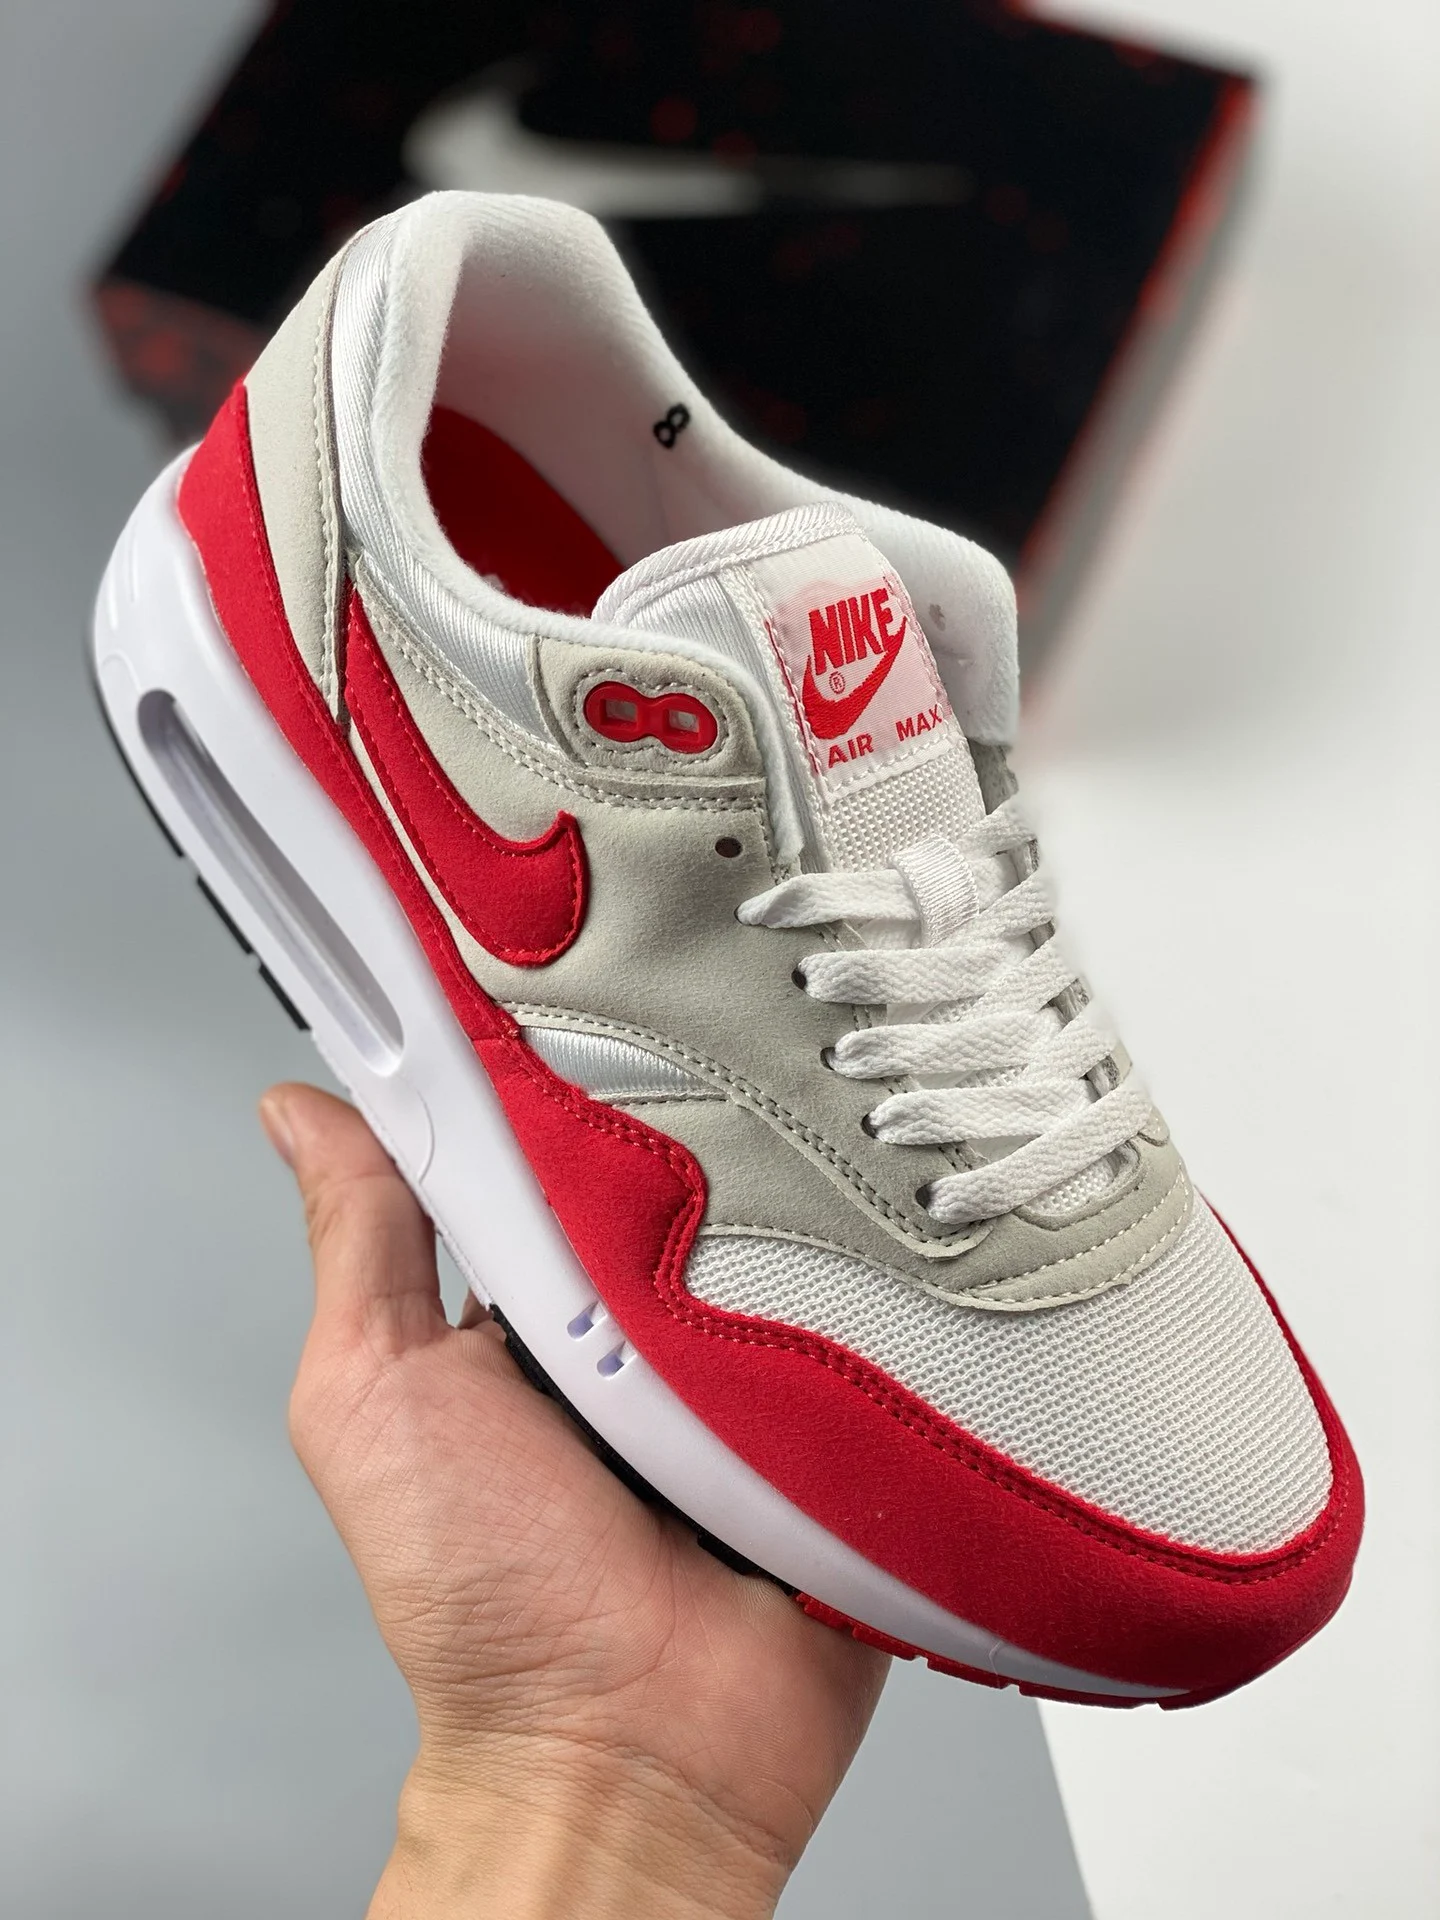 Nike Air Max 1 86 OG Big Bubble White University Red DQ3989-100 For Sale